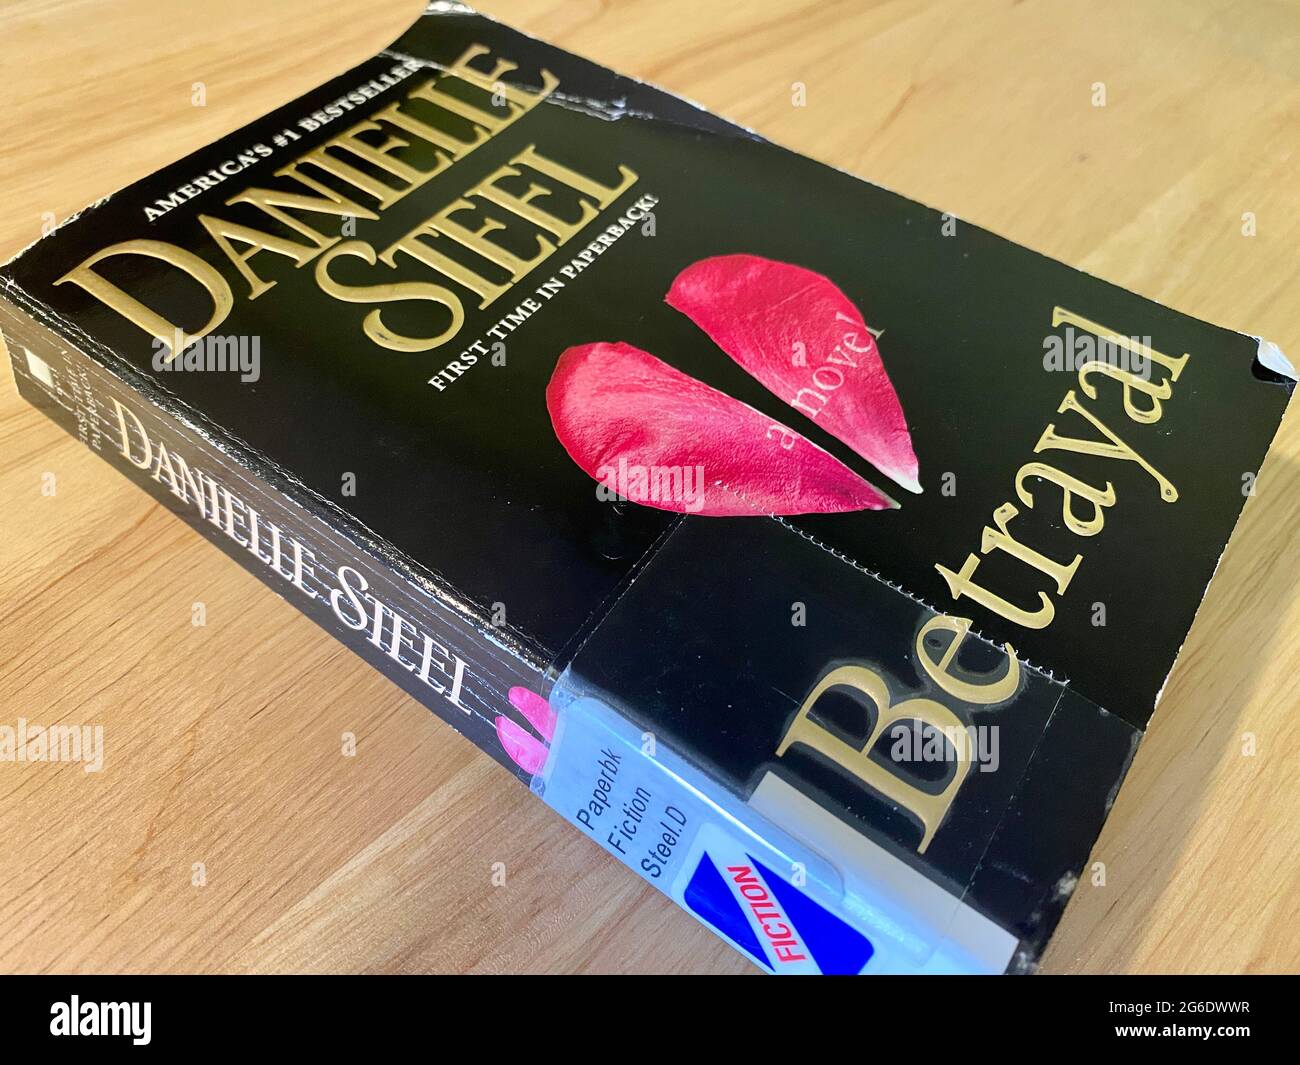 Paperback copy of Betrayal, a novel by Danielle Steel Stock Photo